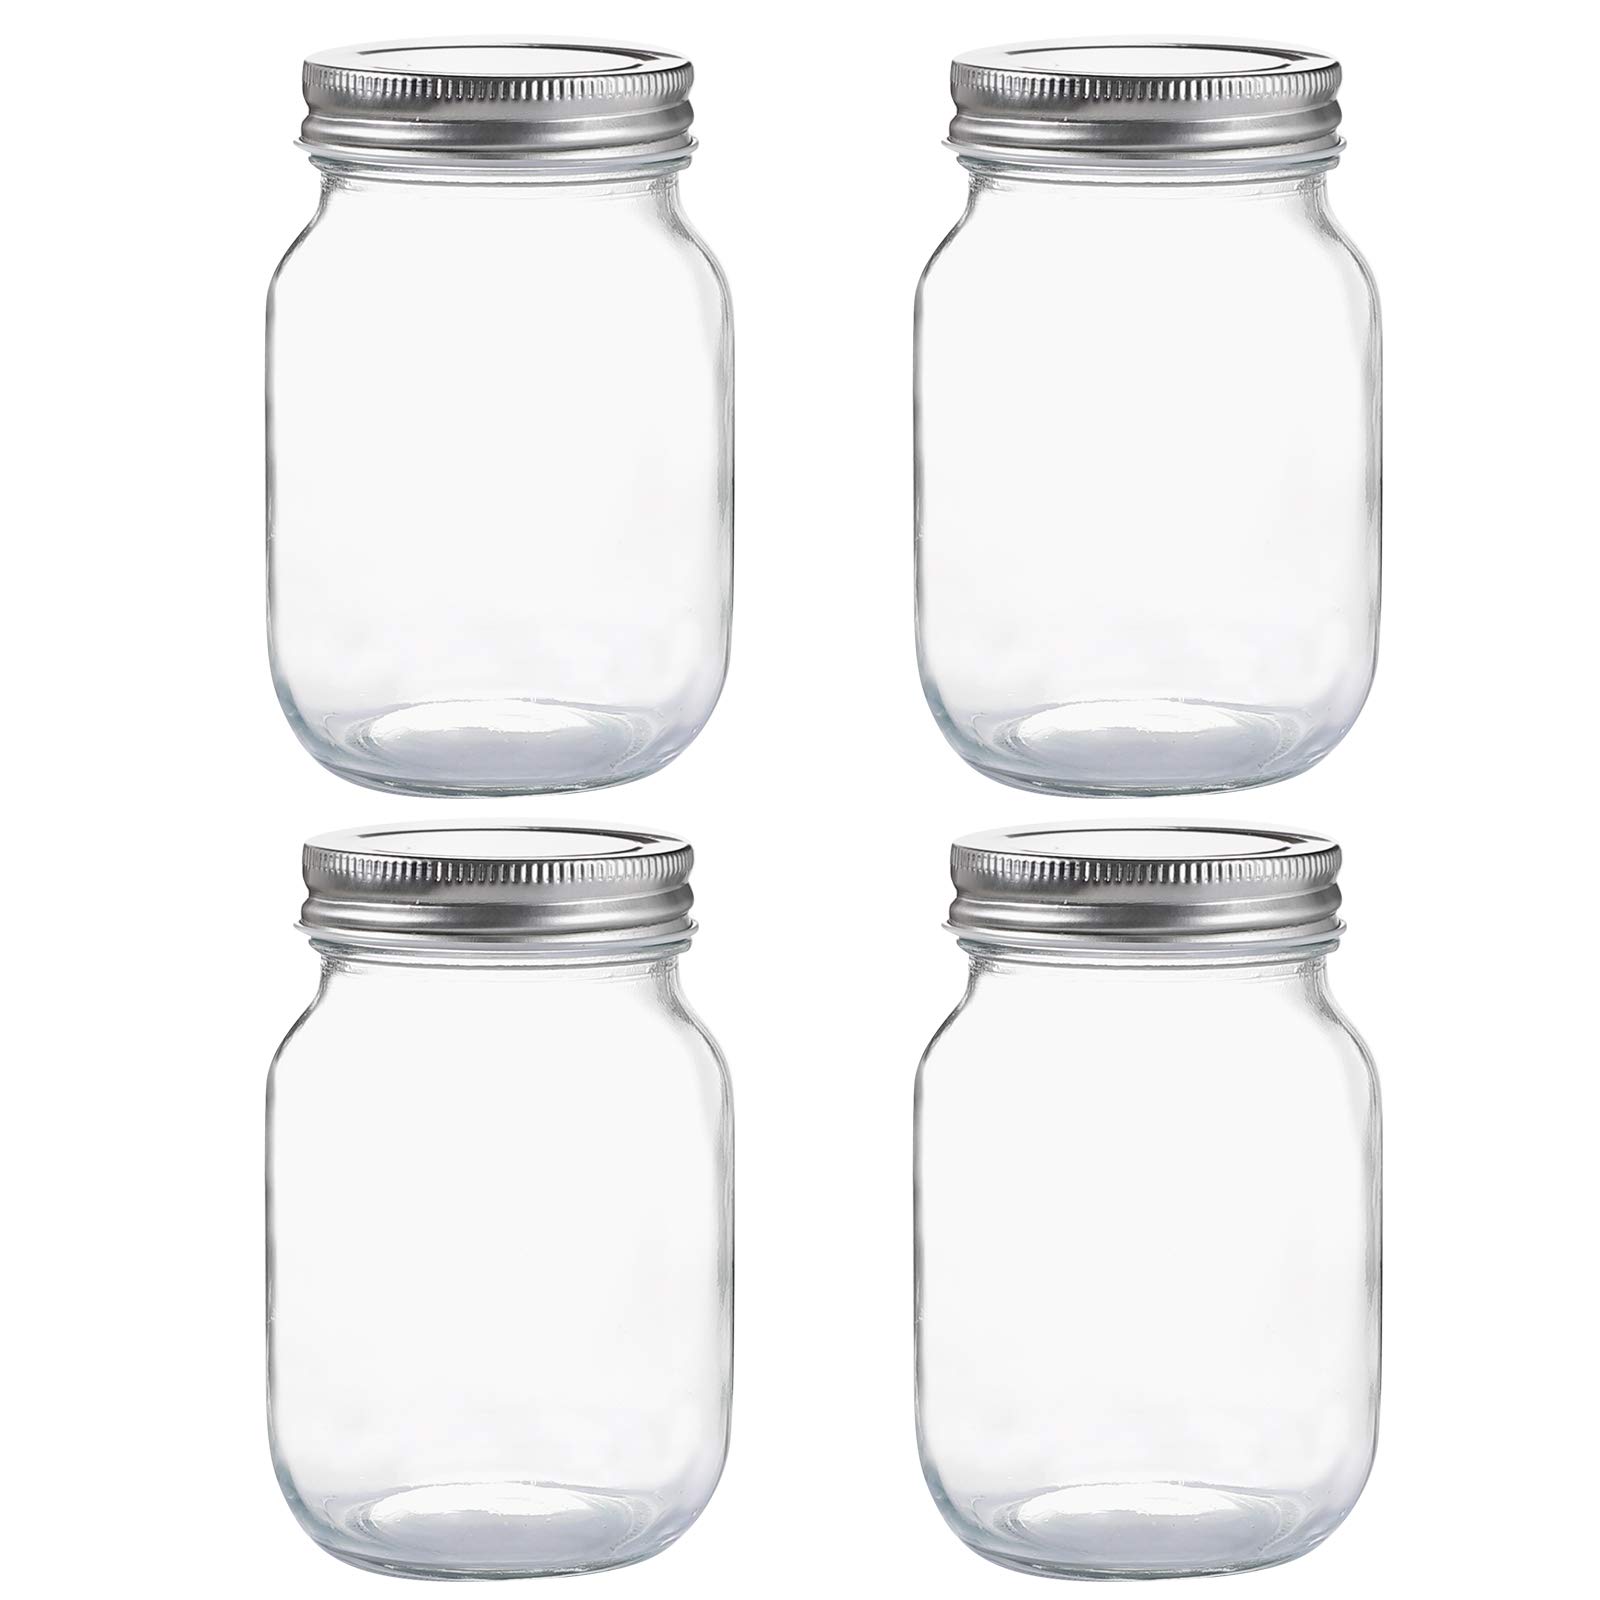 YINGERHUAN glass Regular Mouth Mason Jars, 16 oz clear glass Jars with Silver Metal Lids for Sealing, canning Jars for Food Storage, Overni